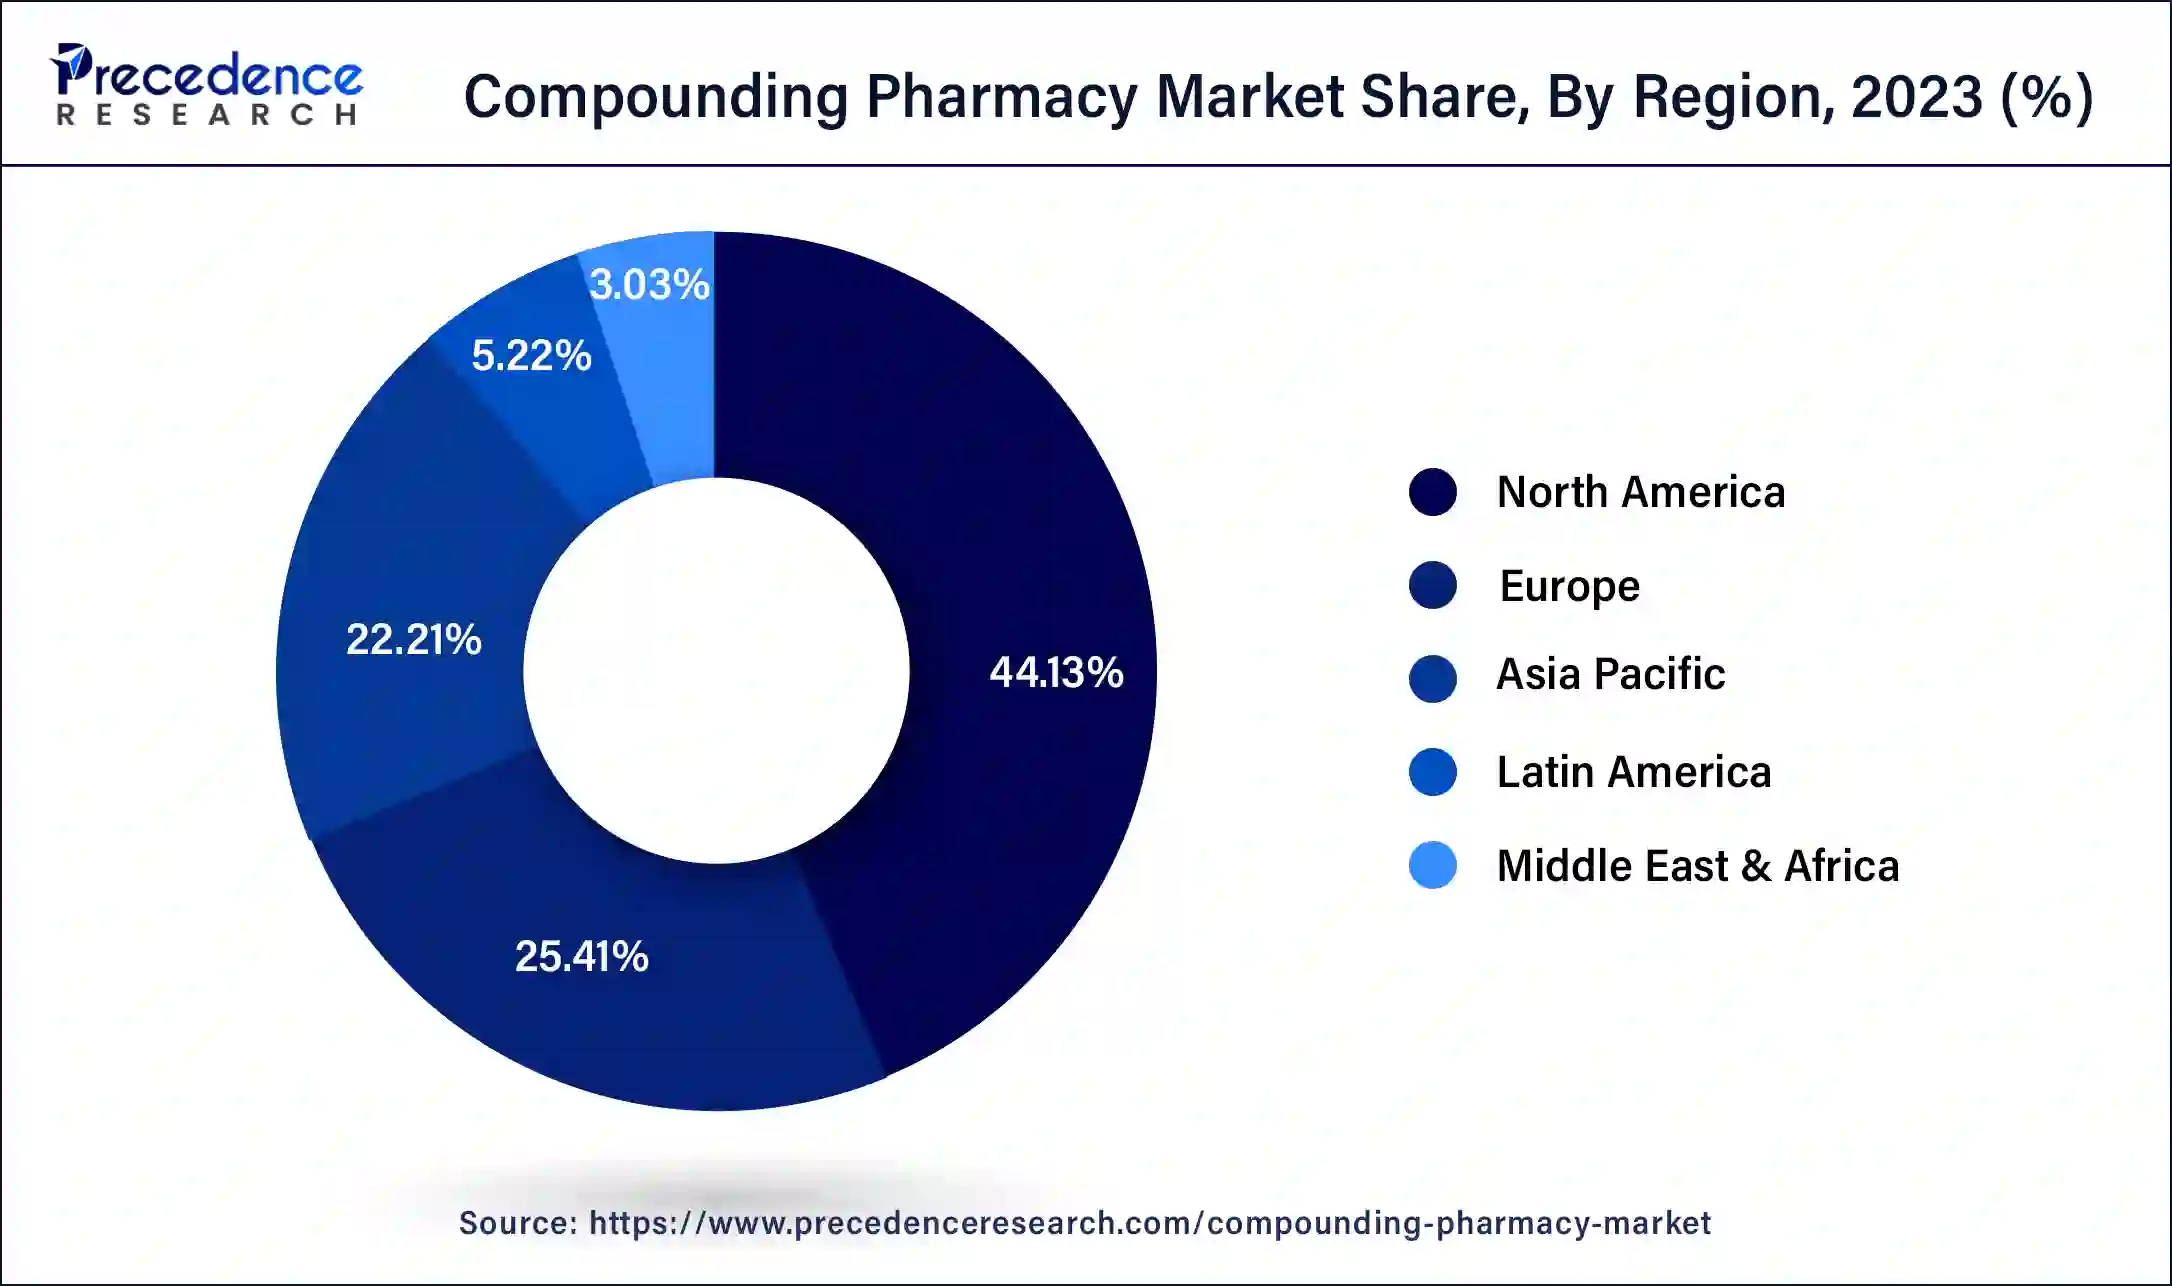 Compounding Pharmacy Market Share, By Region, 2023 (%)